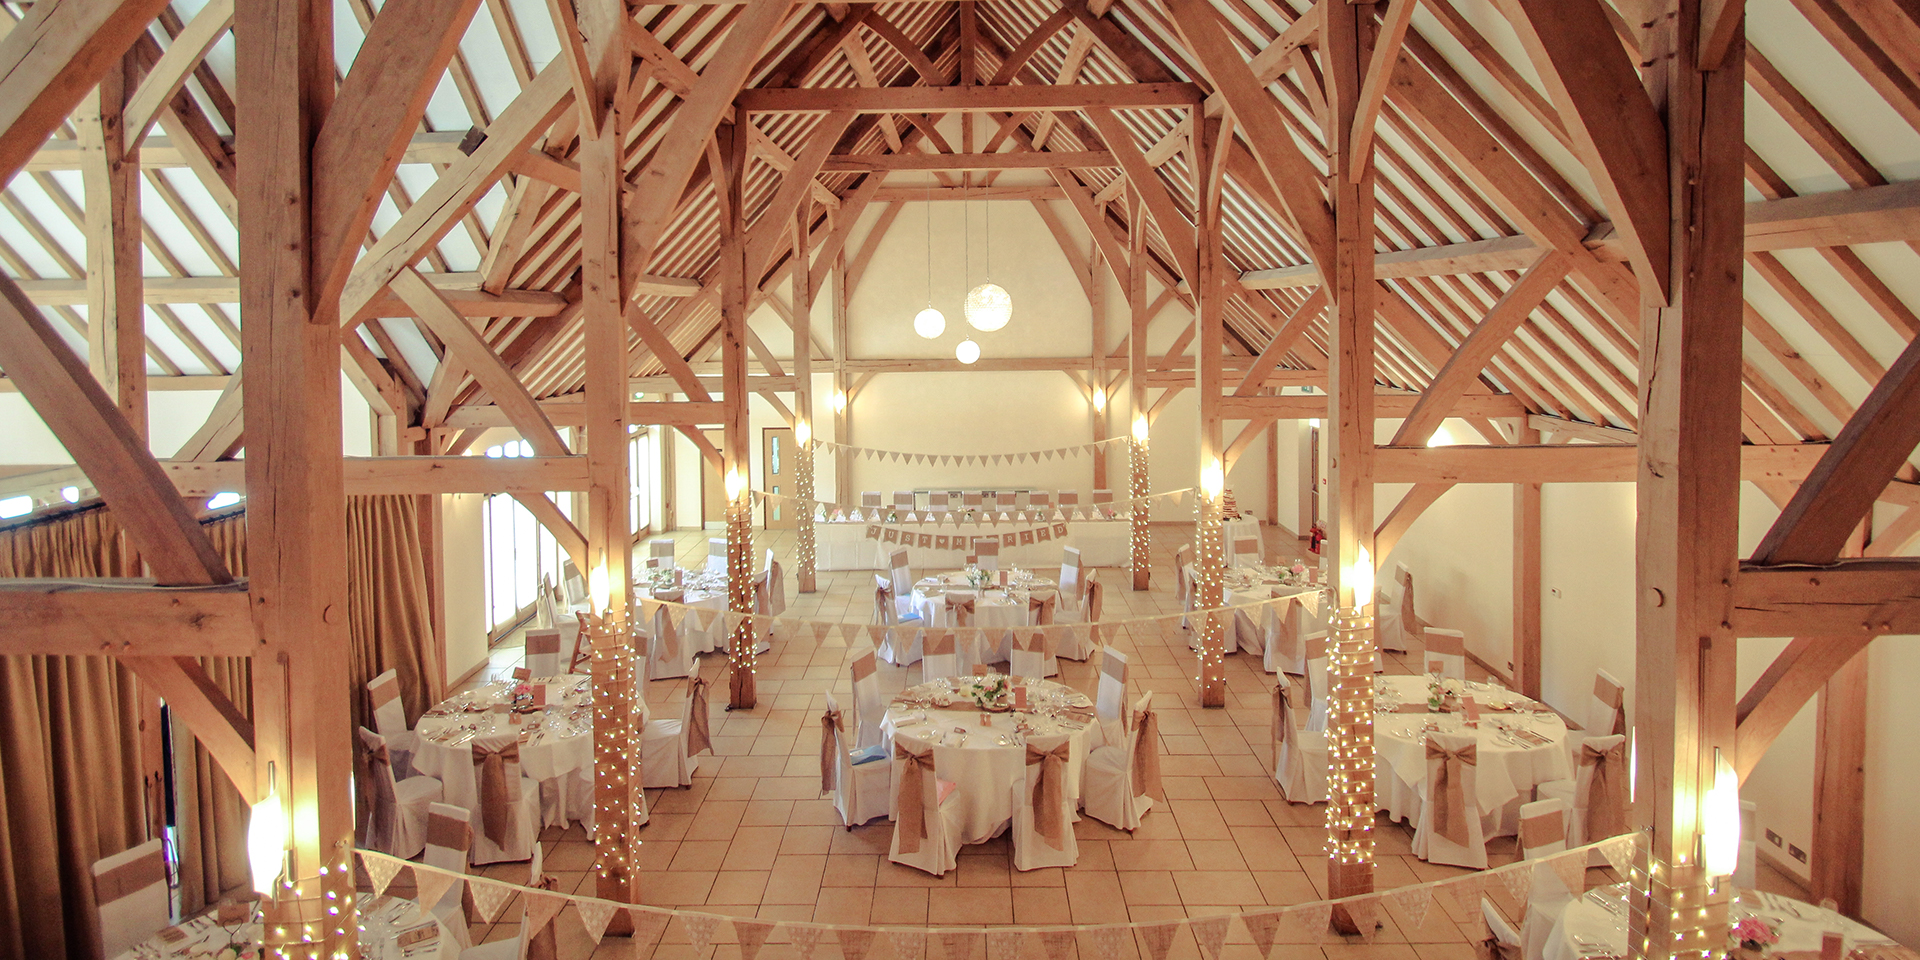 The Reception Barn made the perfect wedding venue for Jen and James beautiful wedding in Hampshire